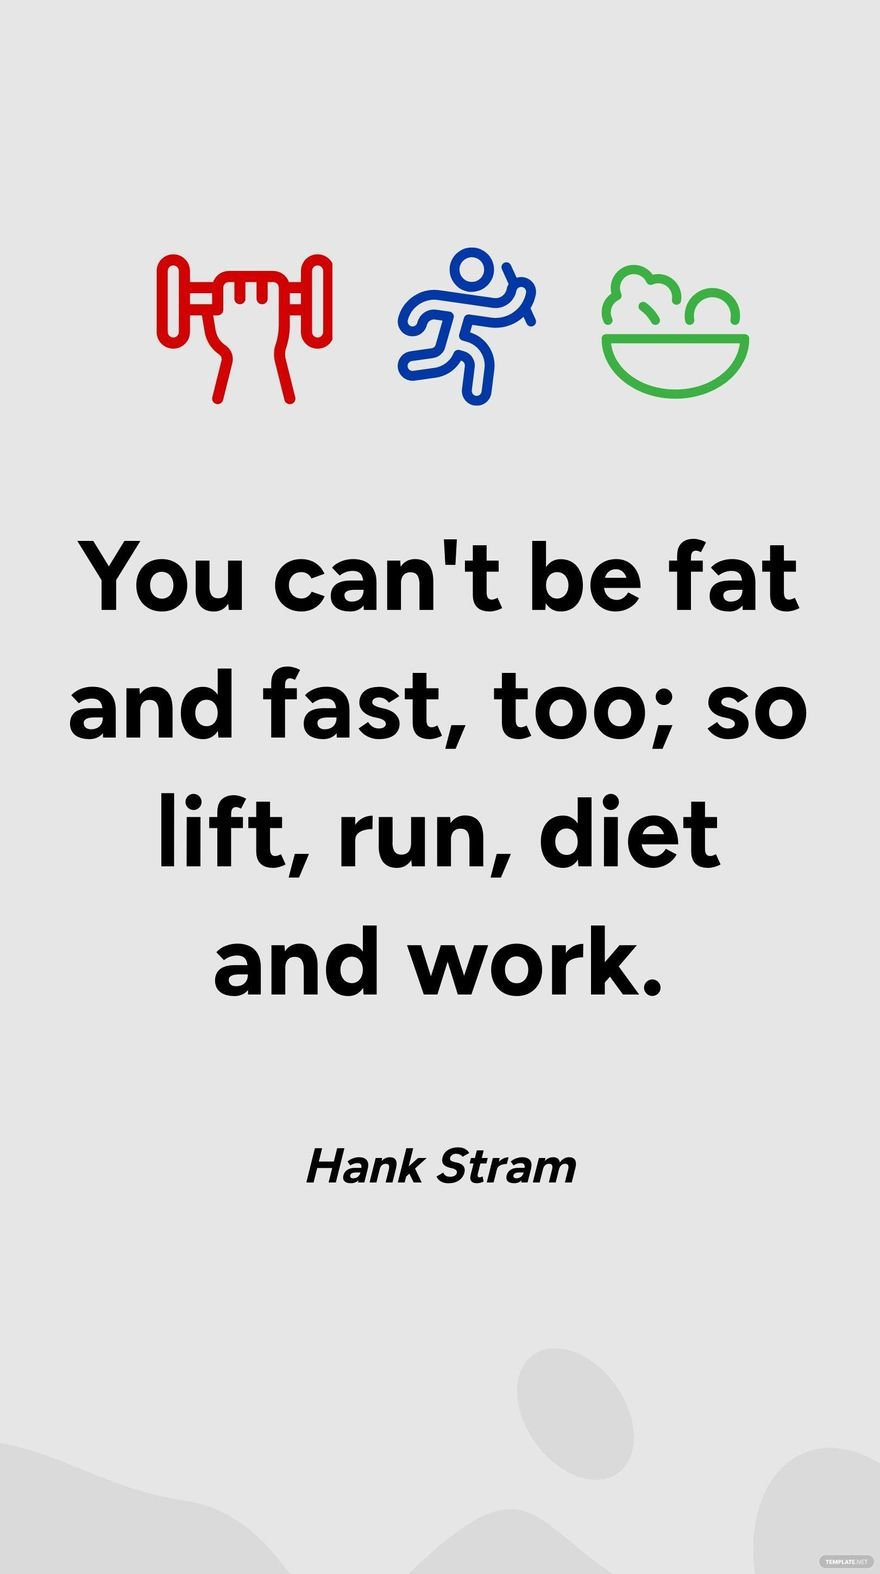 Hank Stram - You can't be fat and fast, too; so lift, run, diet and work.